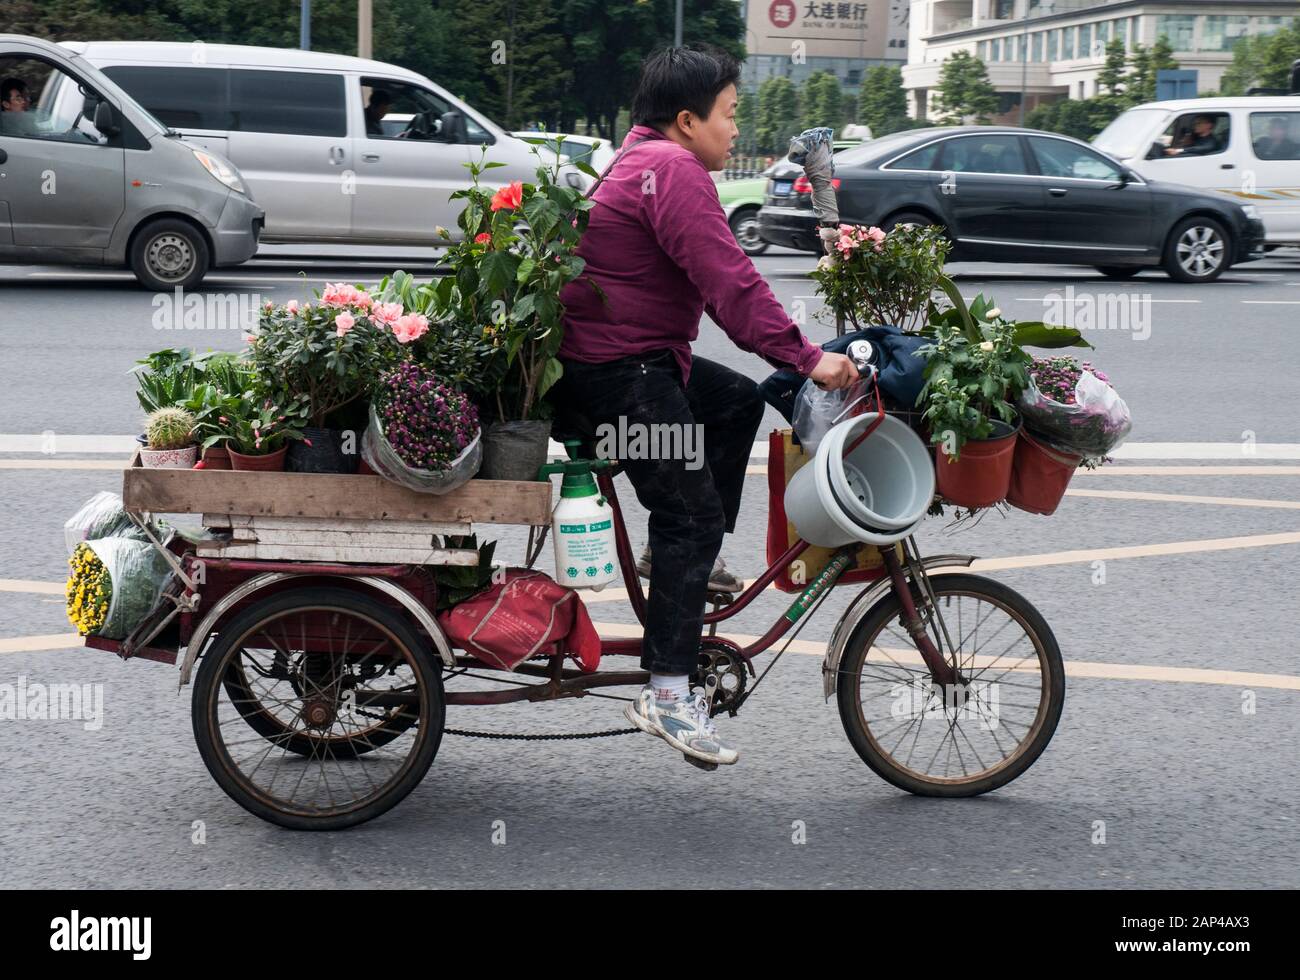 A woman cycles through Chengdu city traffic with a load of plants Stock Photo